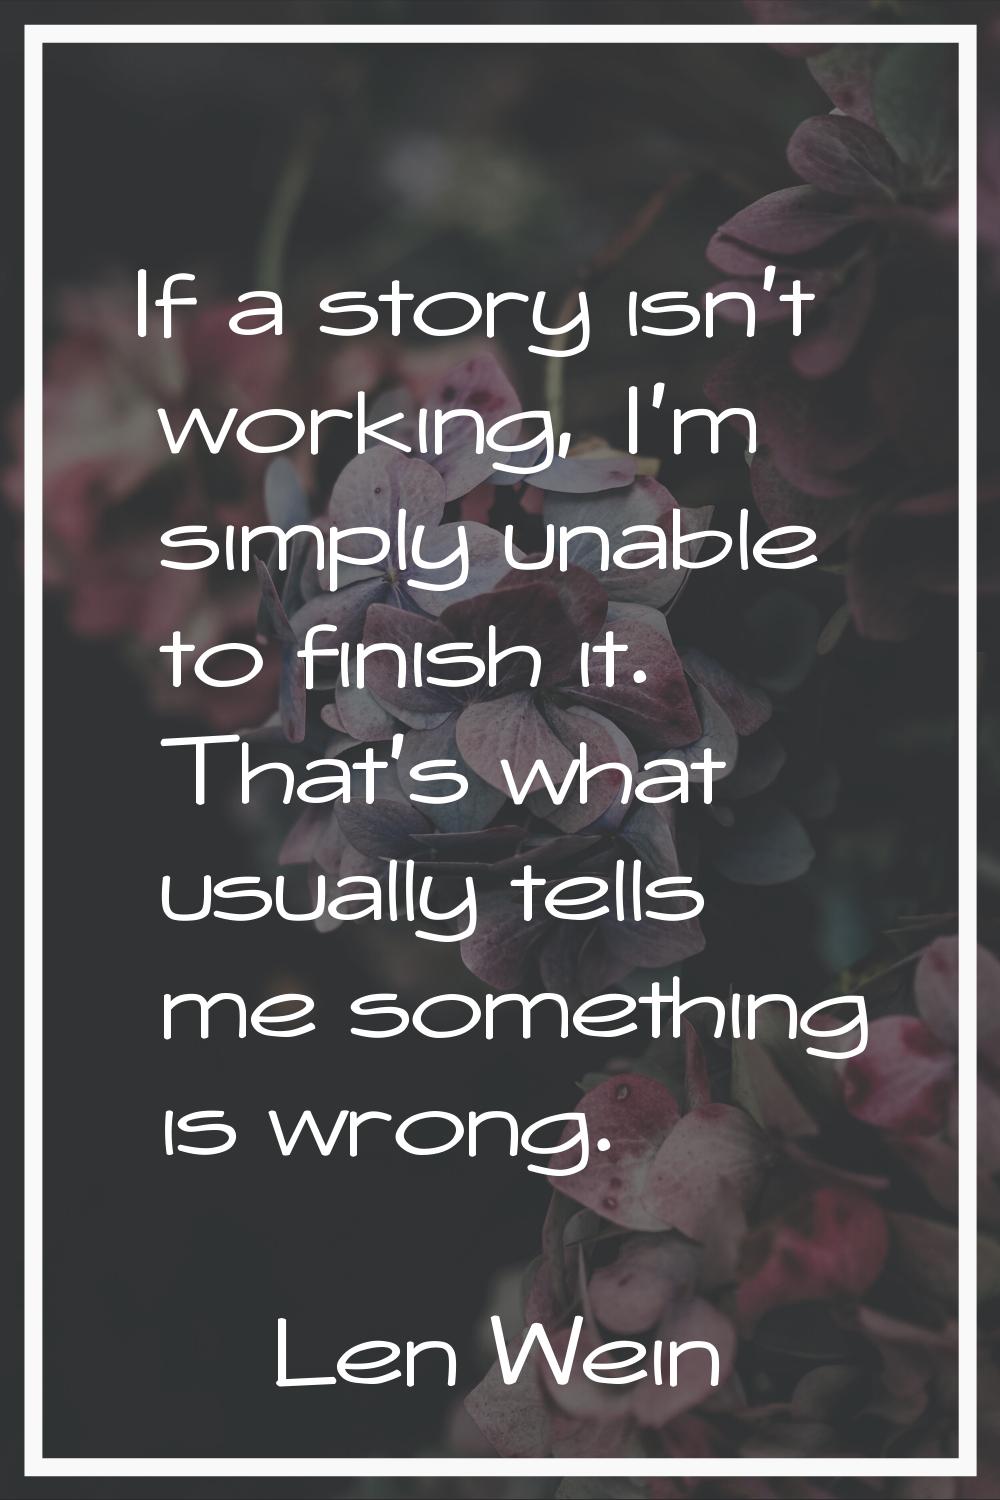 If a story isn't working, I'm simply unable to finish it. That's what usually tells me something is